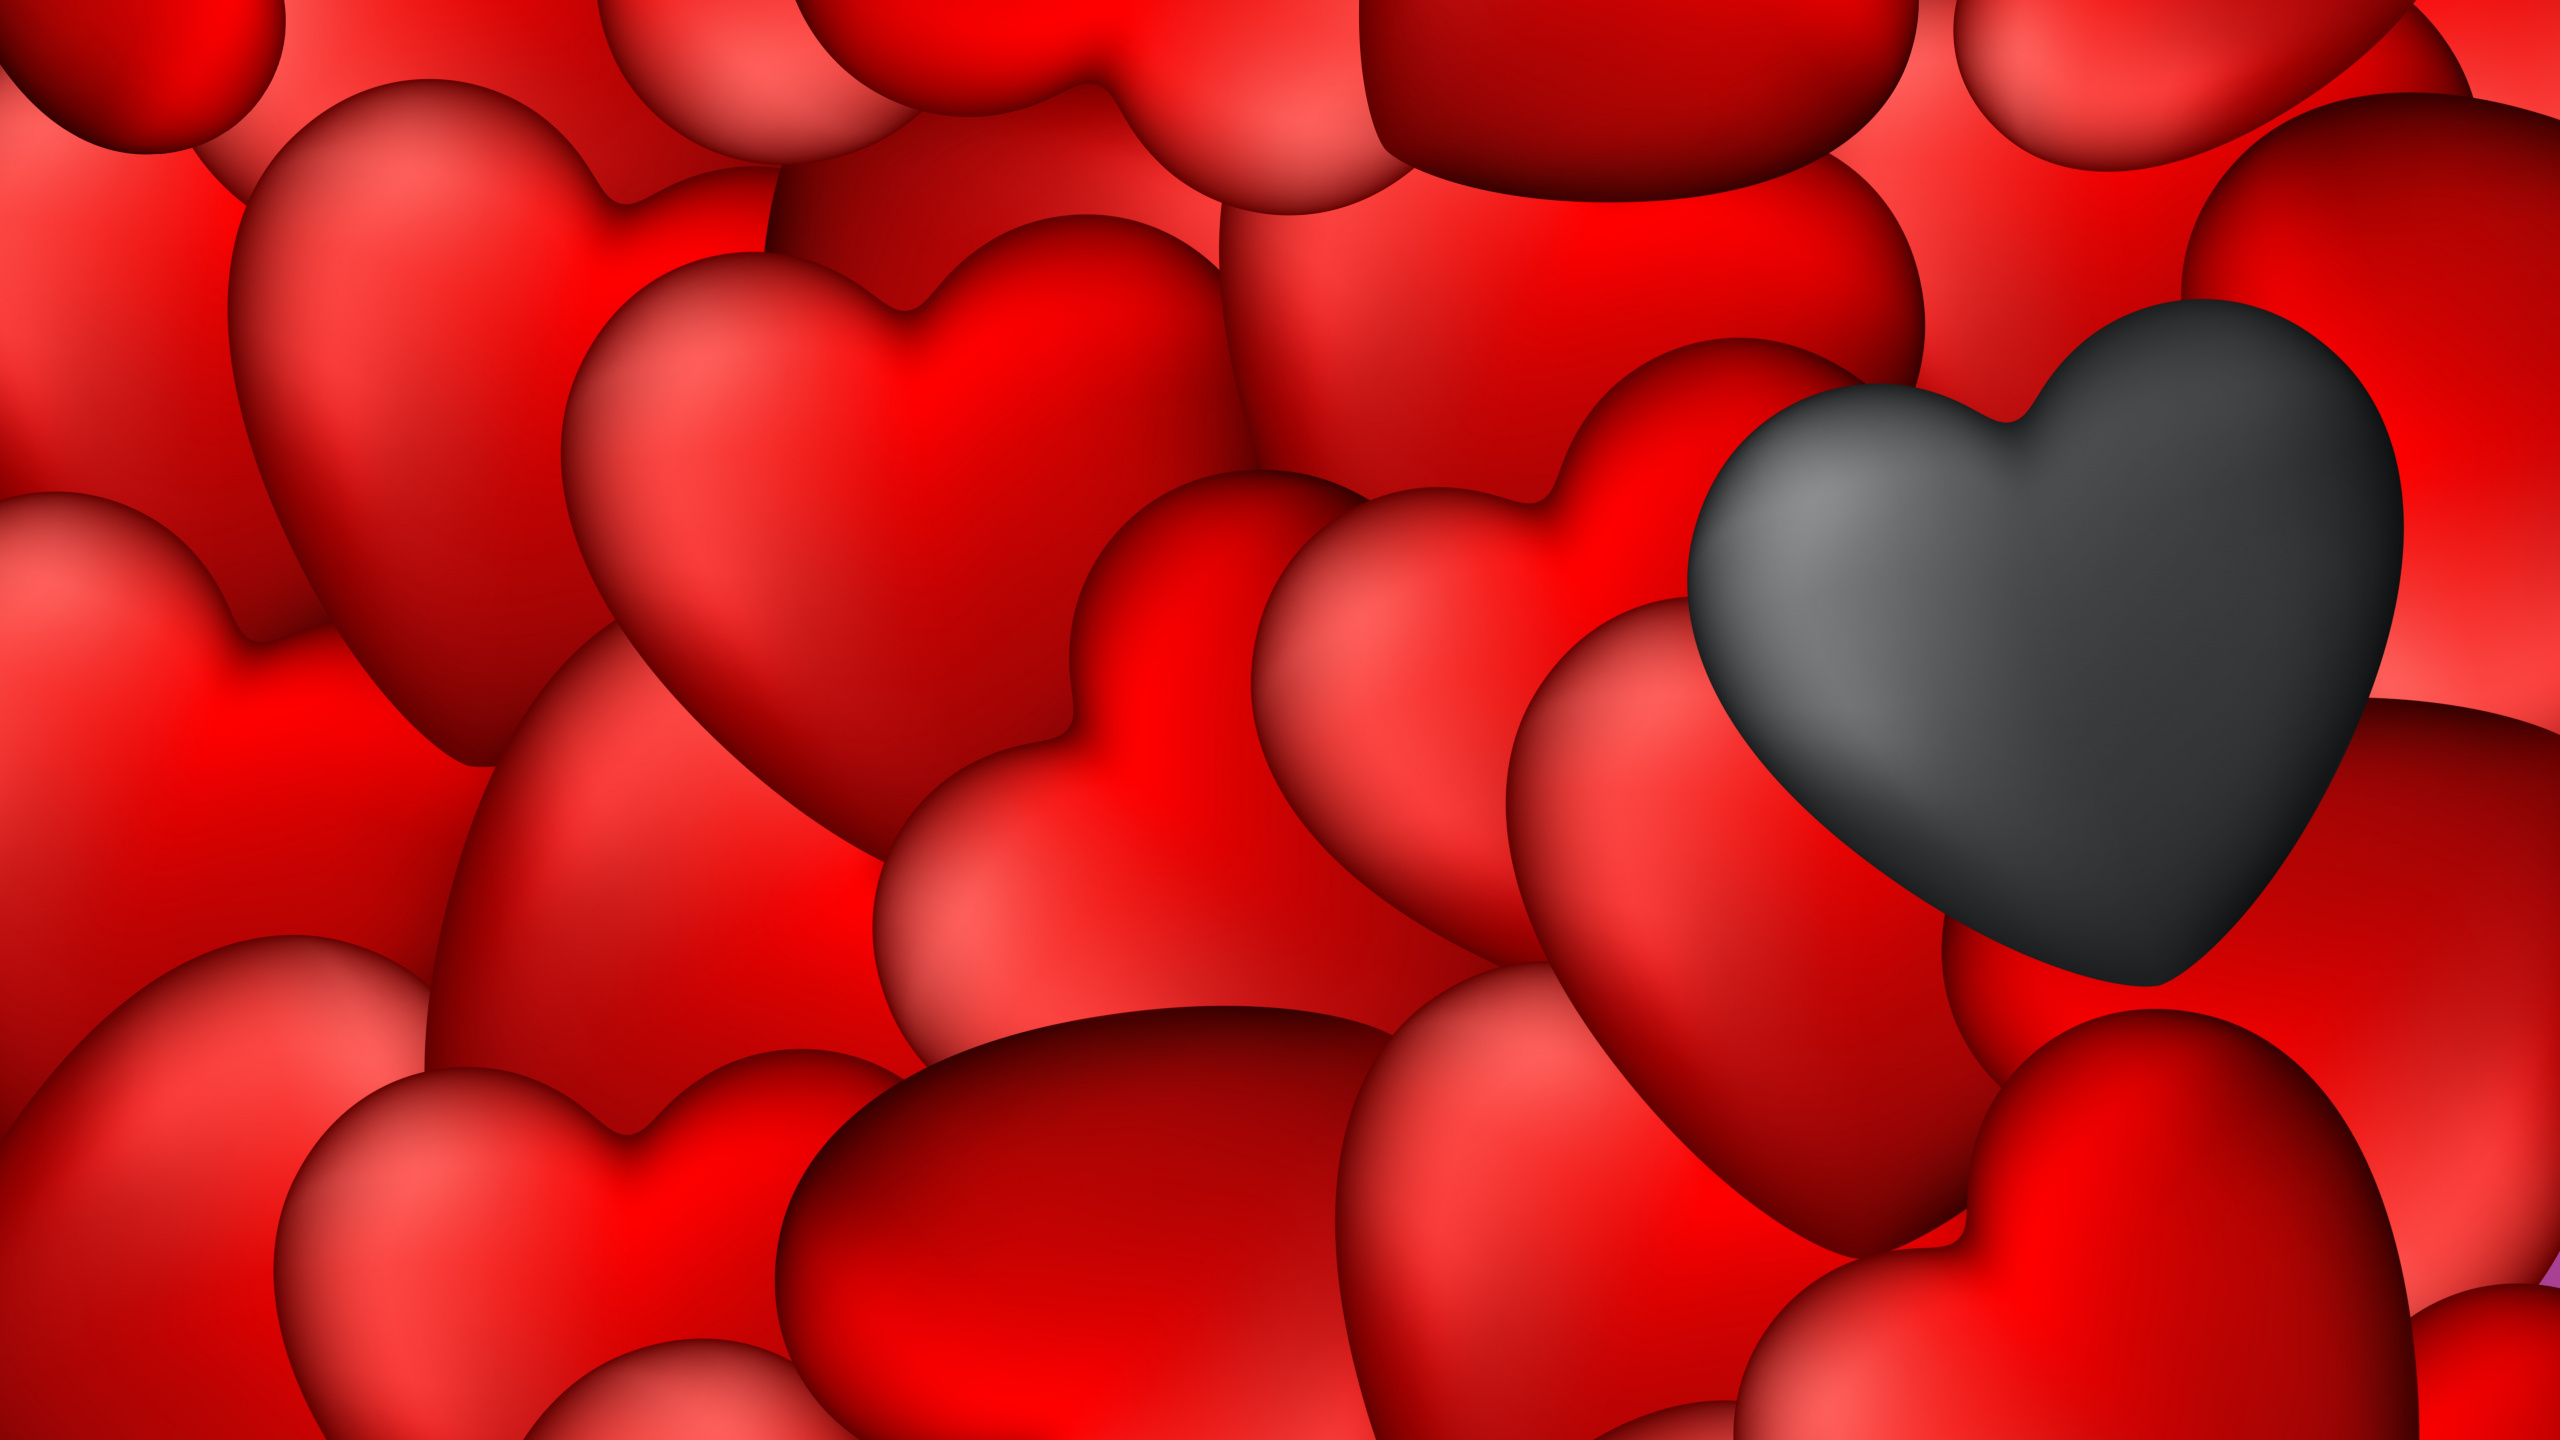 Heart, Black, Red, Valentines Day, Petal. Wallpaper in 2560x1440 Resolution